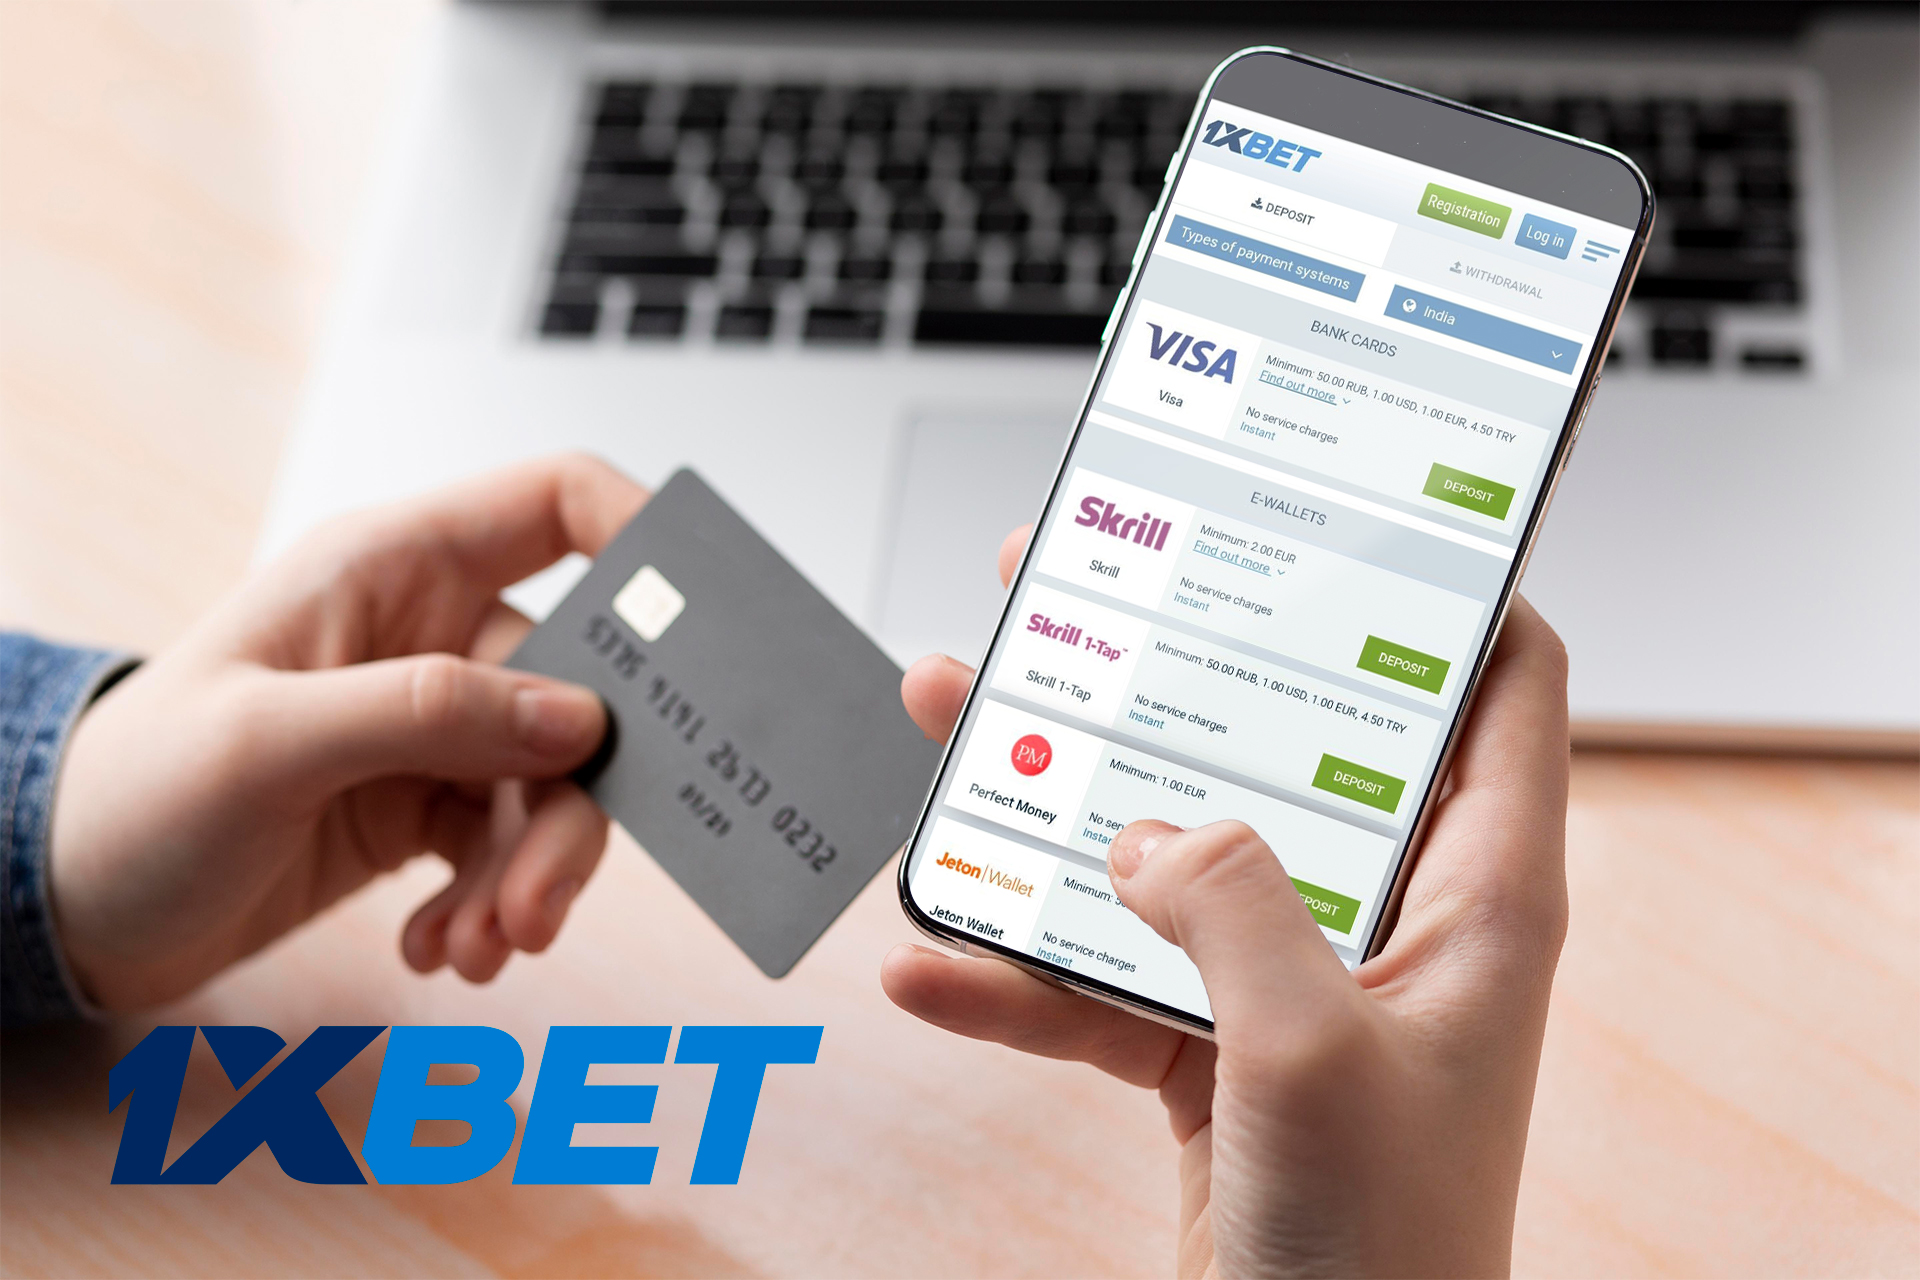 In the 1xbet app you can use all the same deposit methods as in the web version.